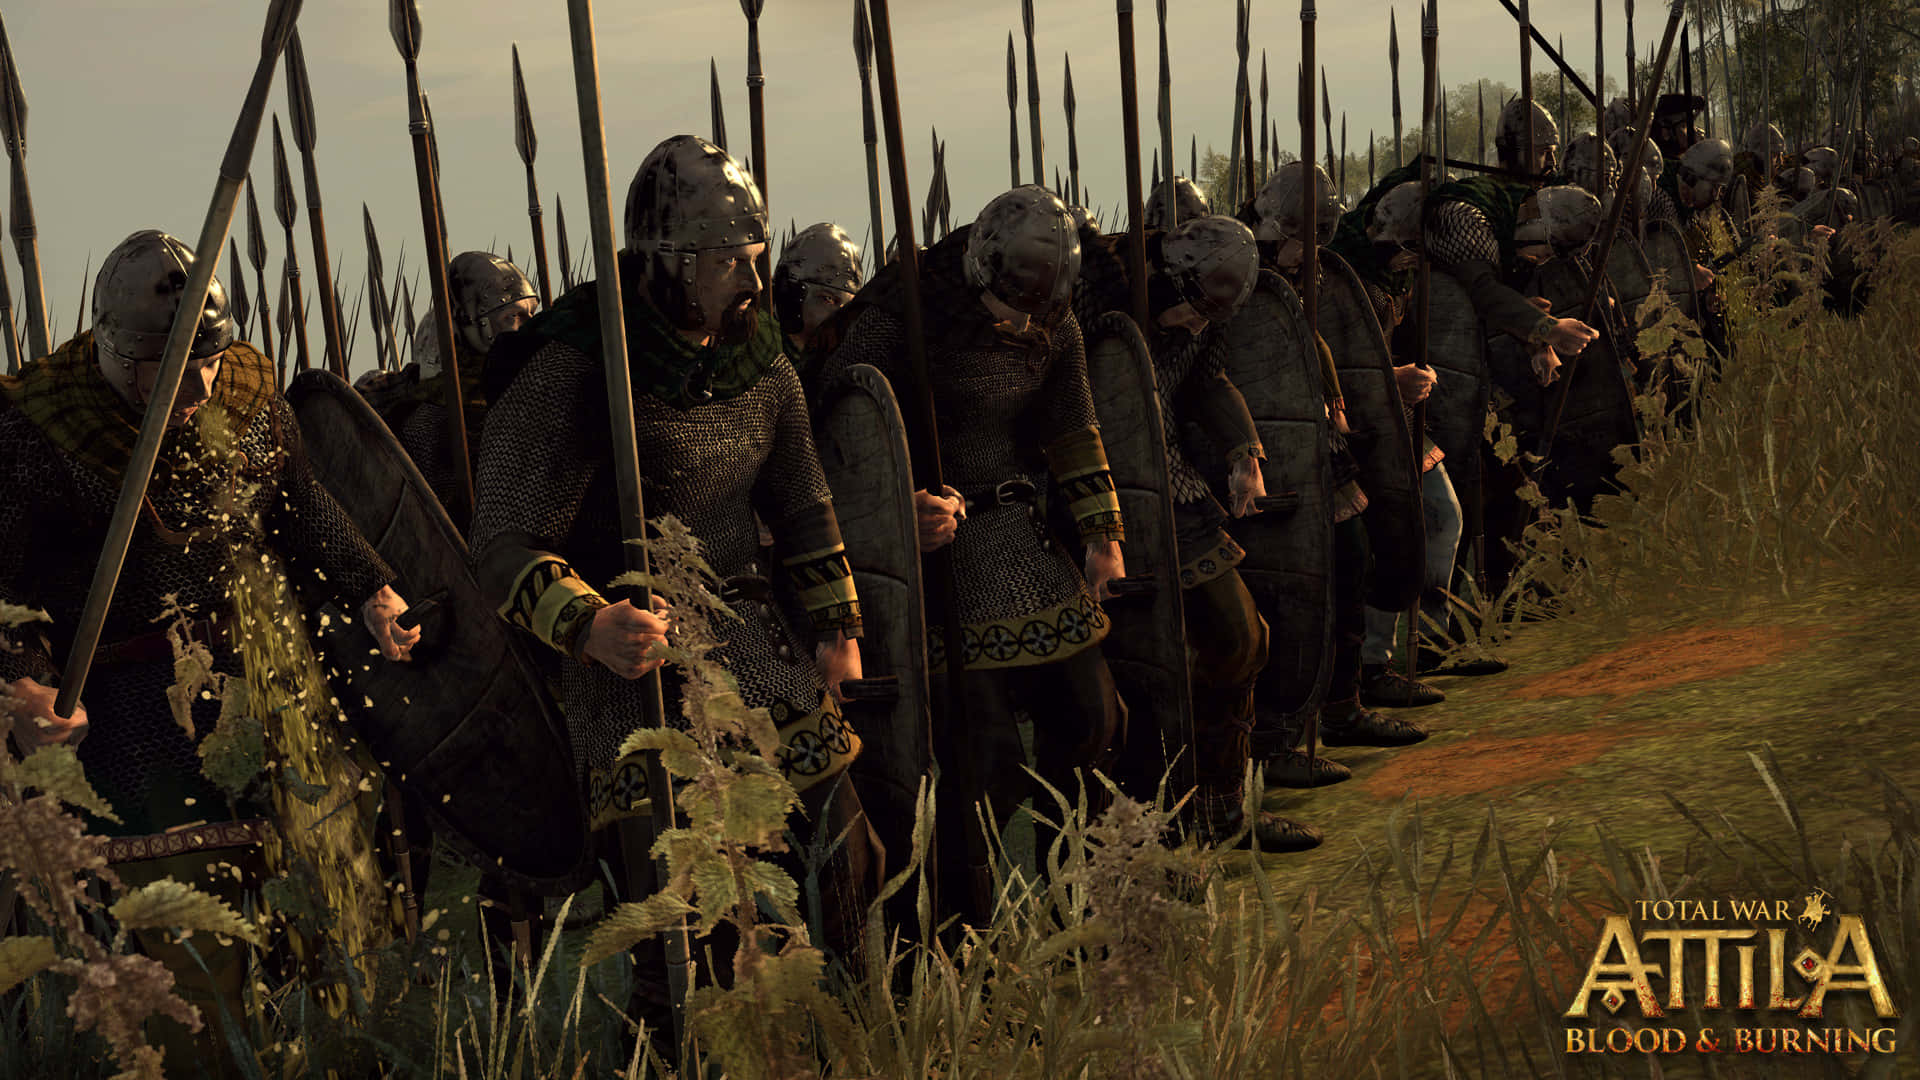 Join the Total War in Attila